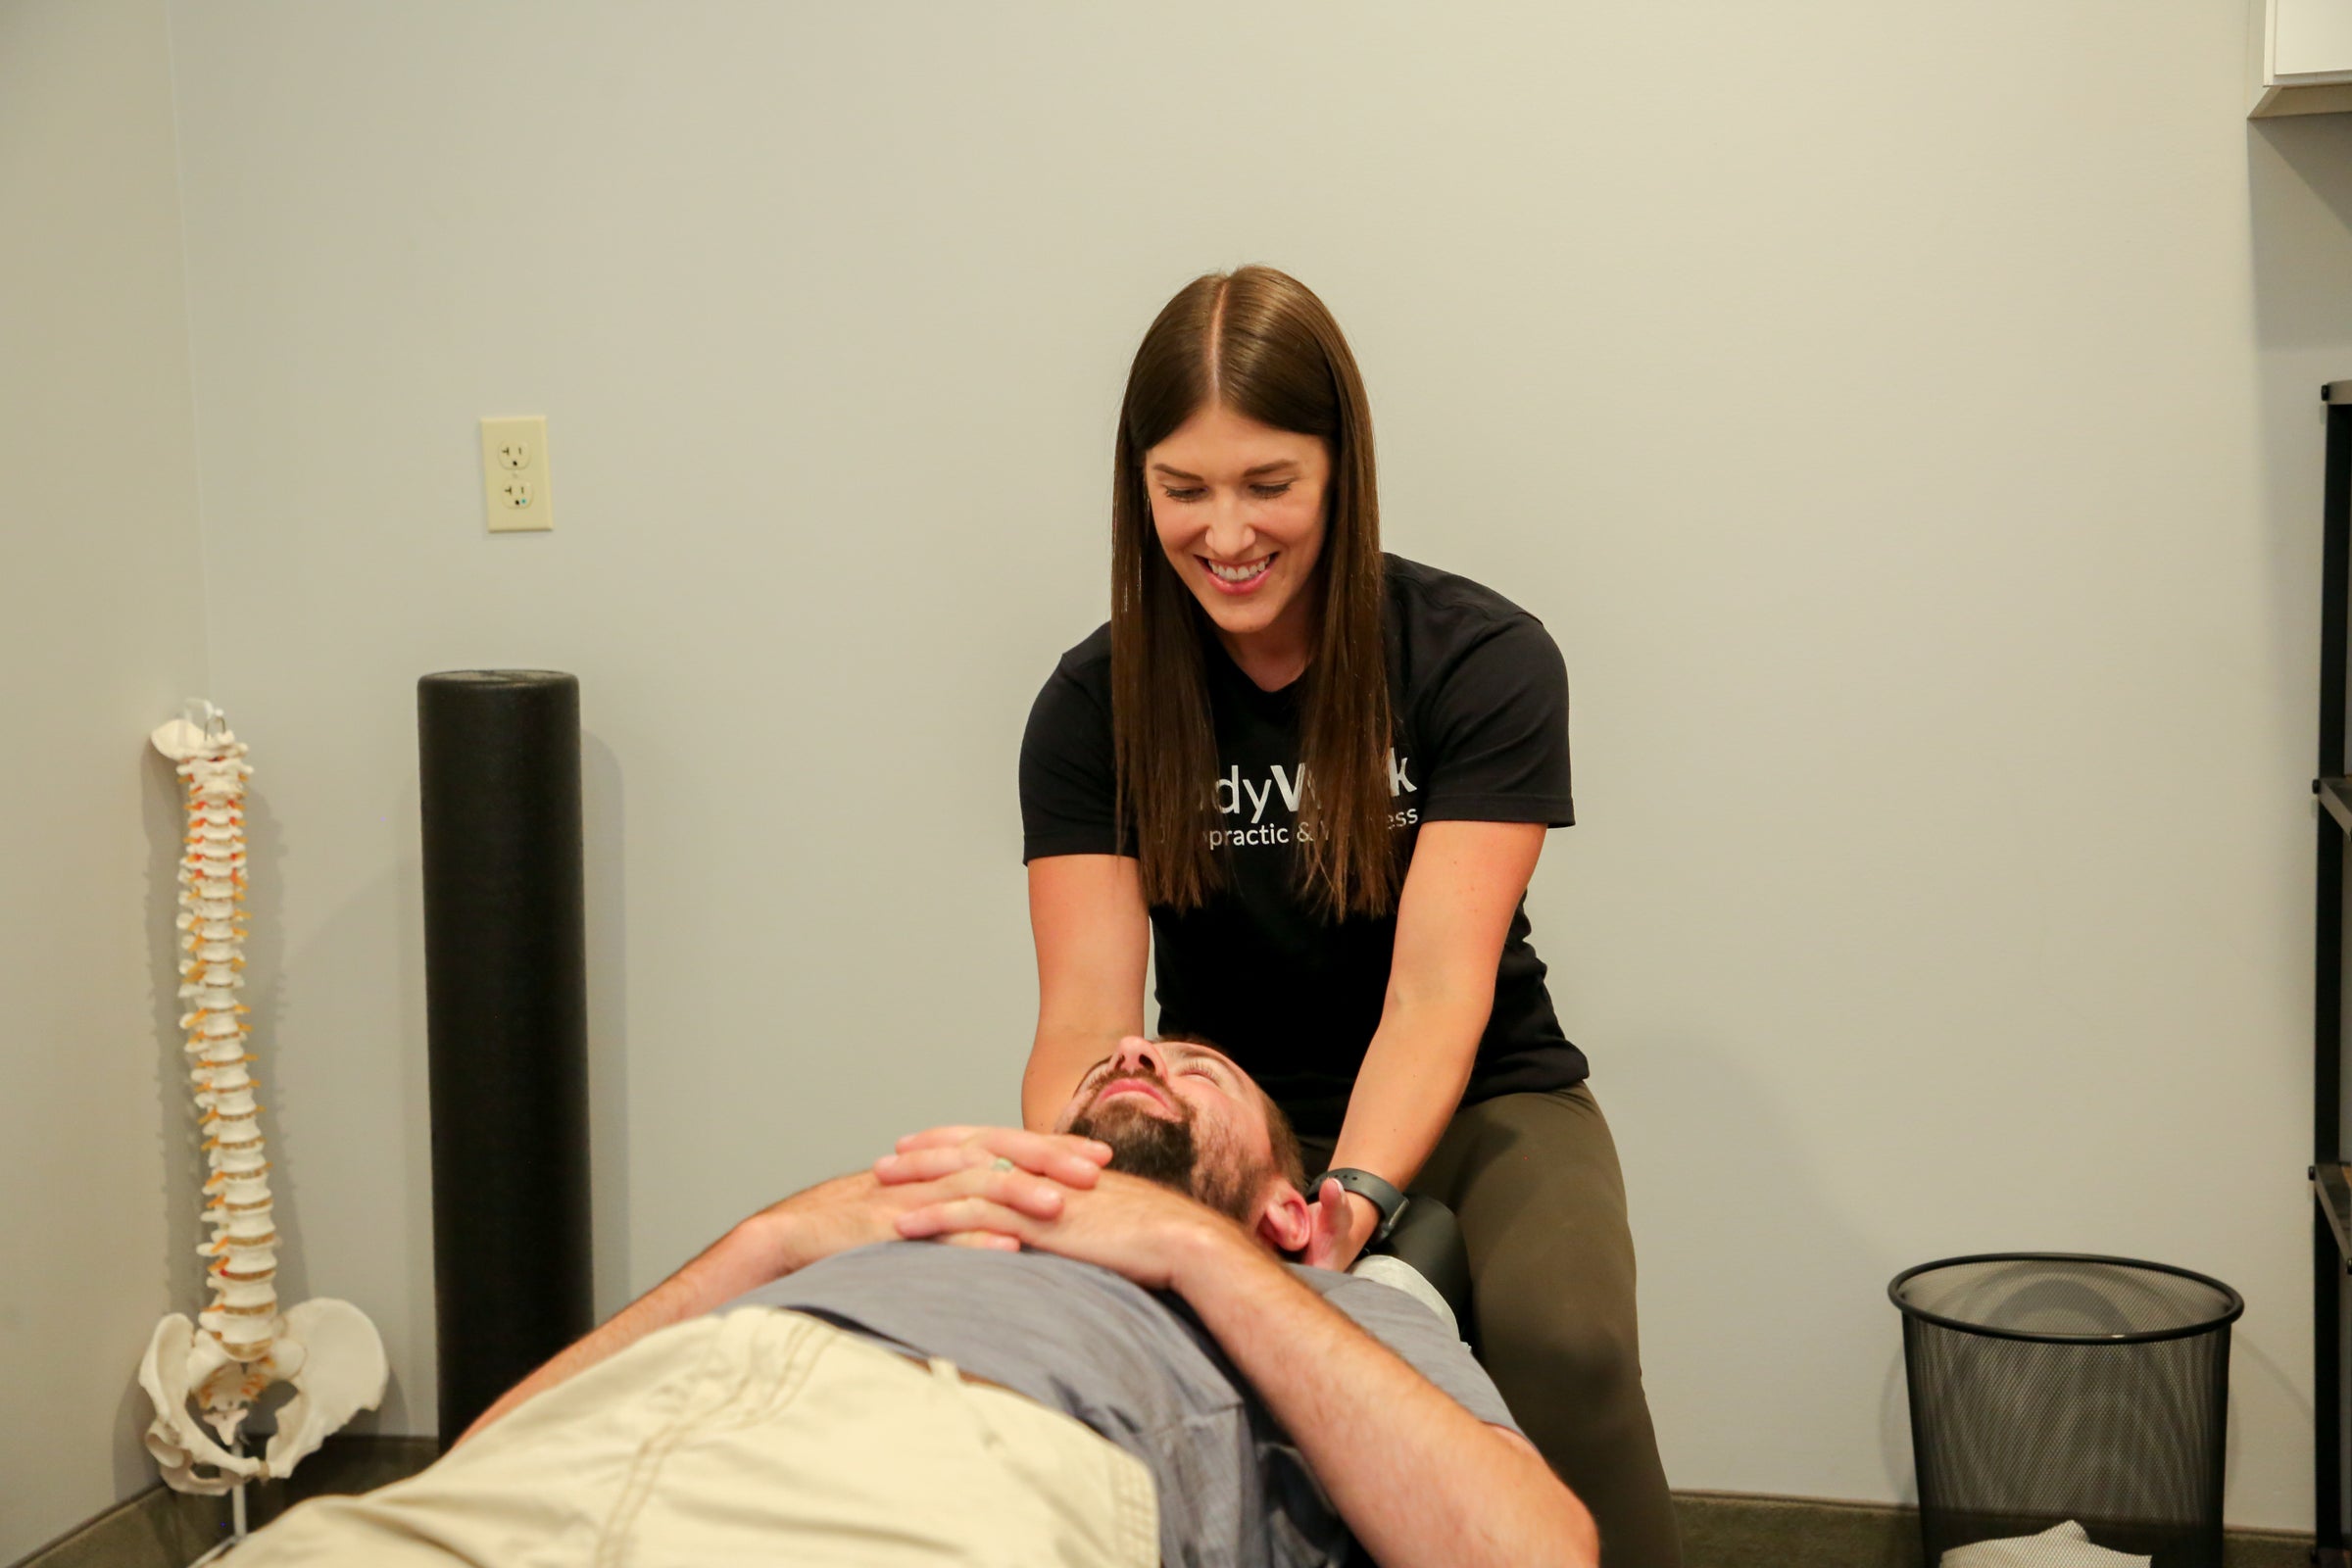 Massage Therapy, Chiropractor in Chillicothe, OH